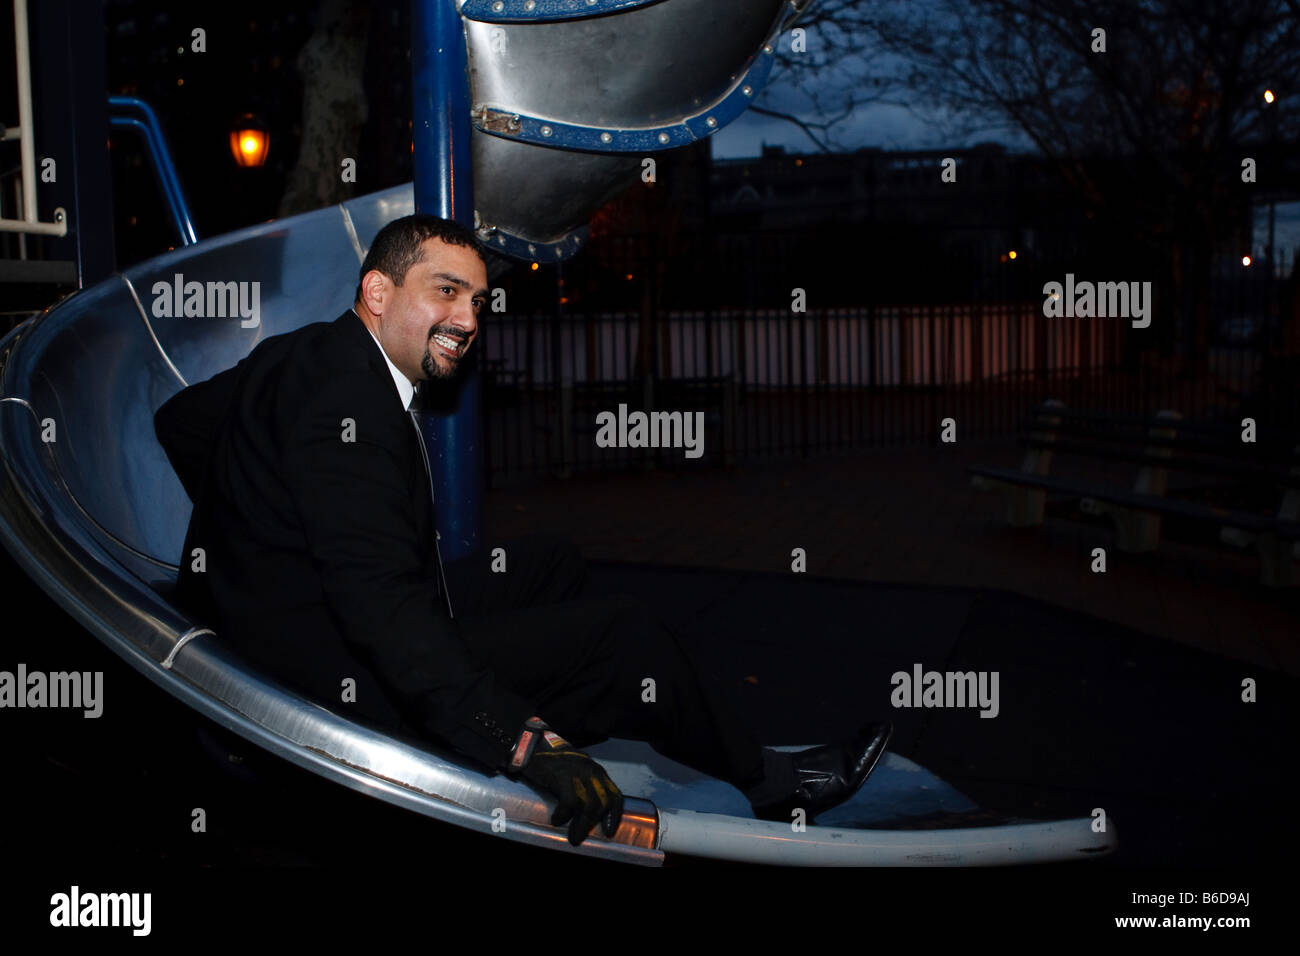 A man in a suit goes down a slide in a children's playground. Stock Photo